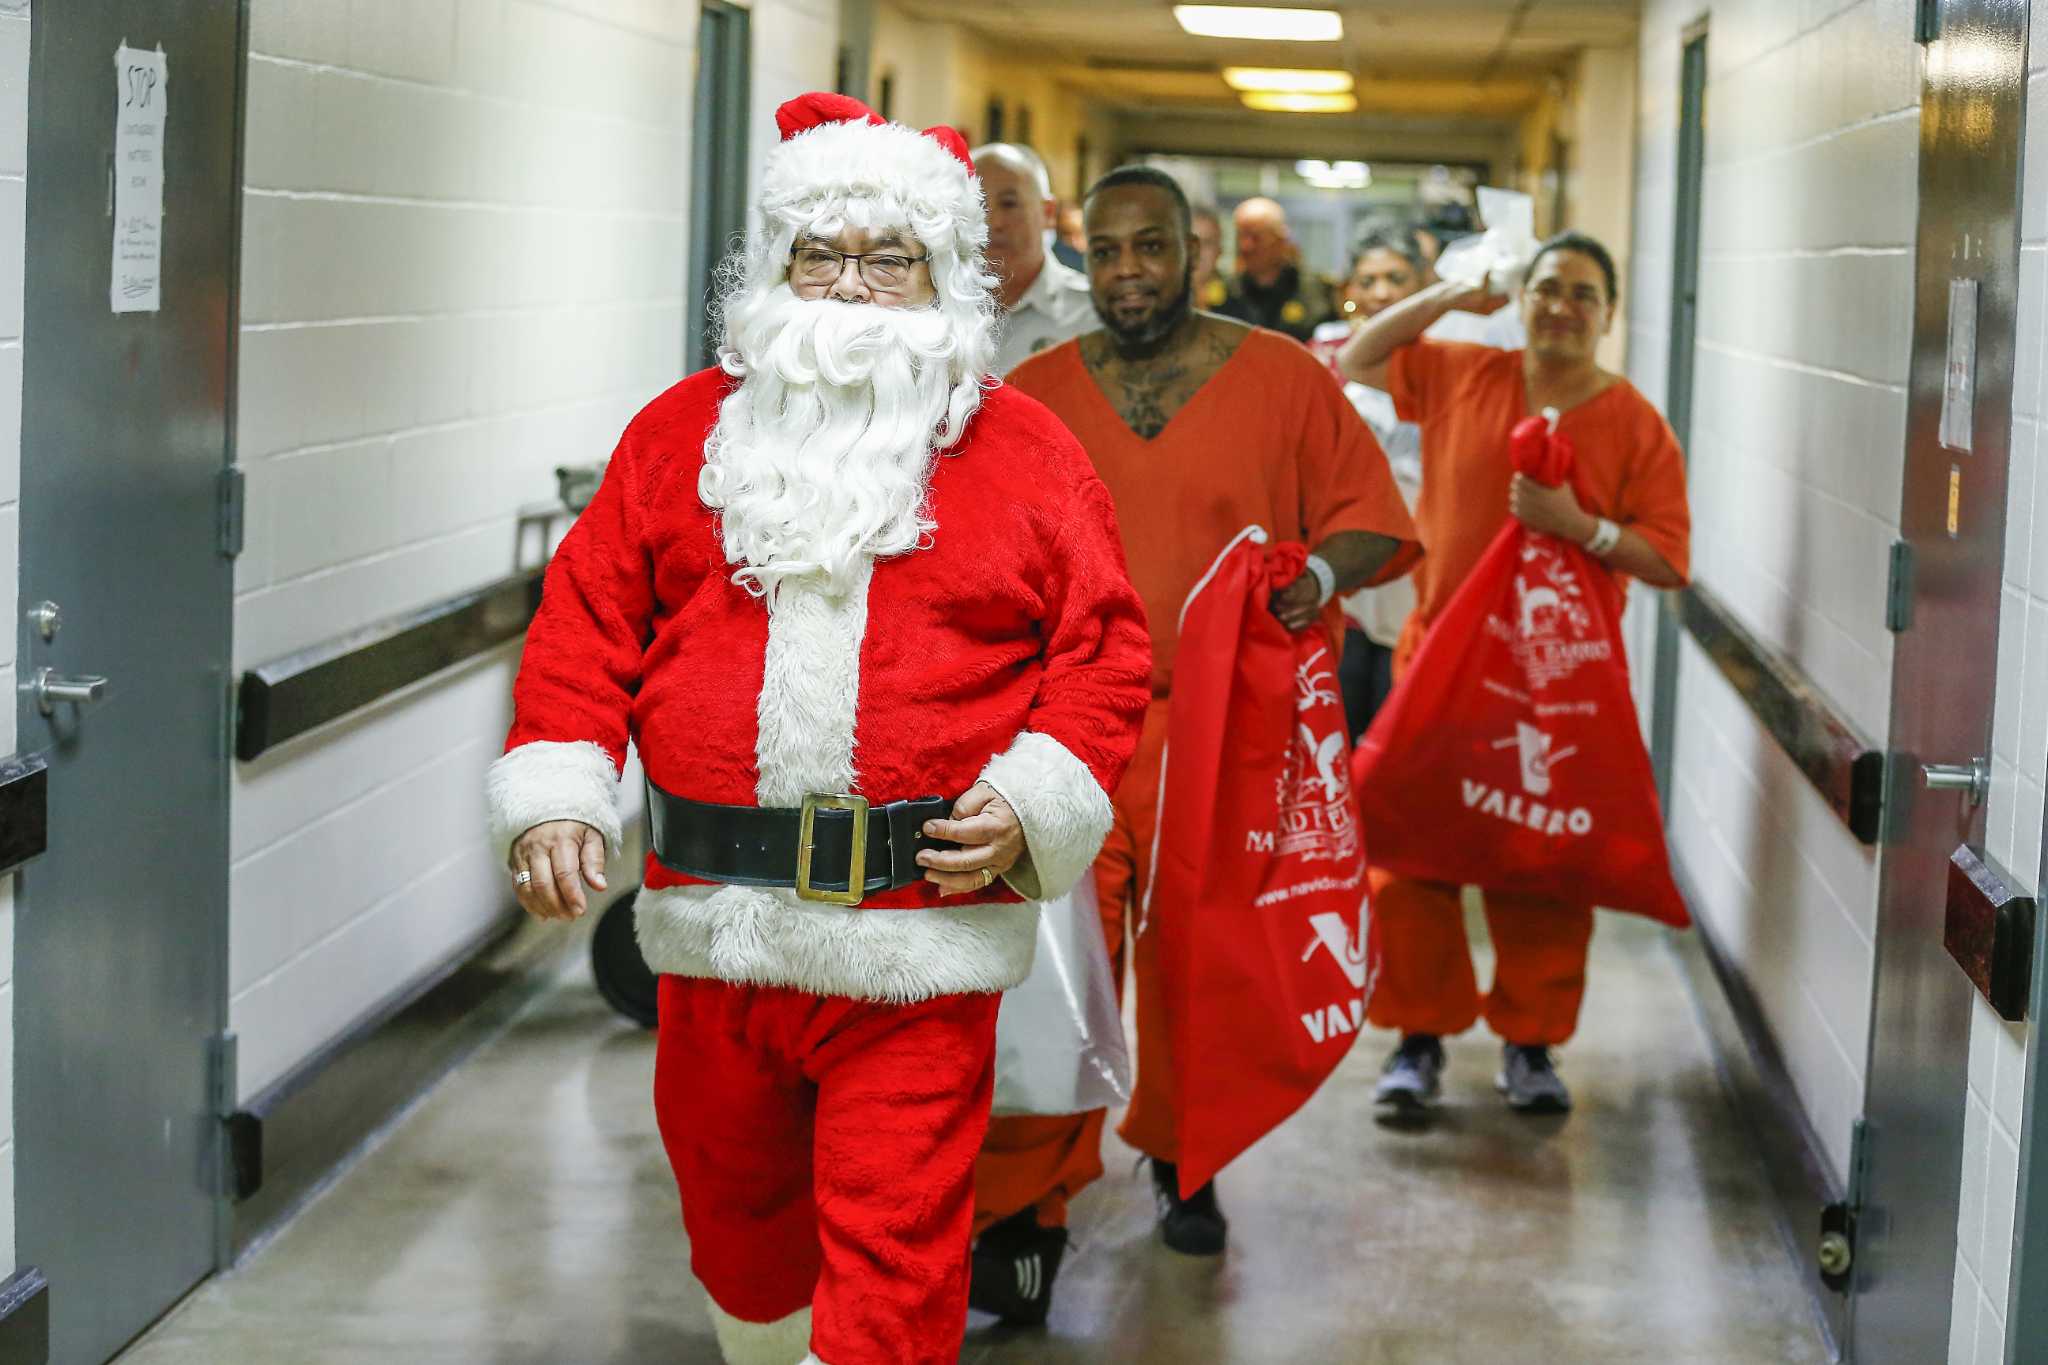 Santa Claus pays belated visit to Harris County jail - Houston Chronicle